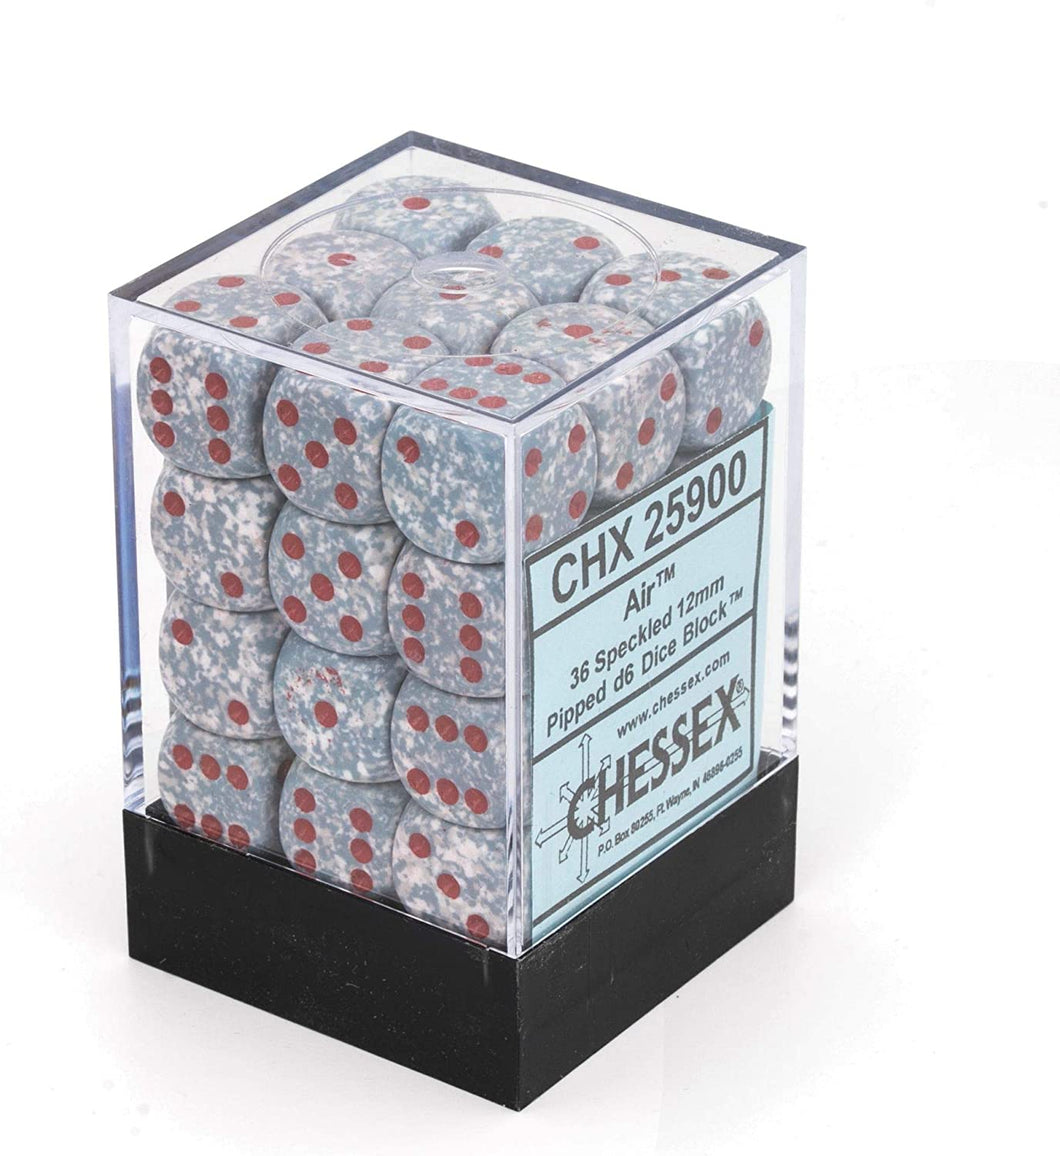 Gray and white d6 dice set with red numbers